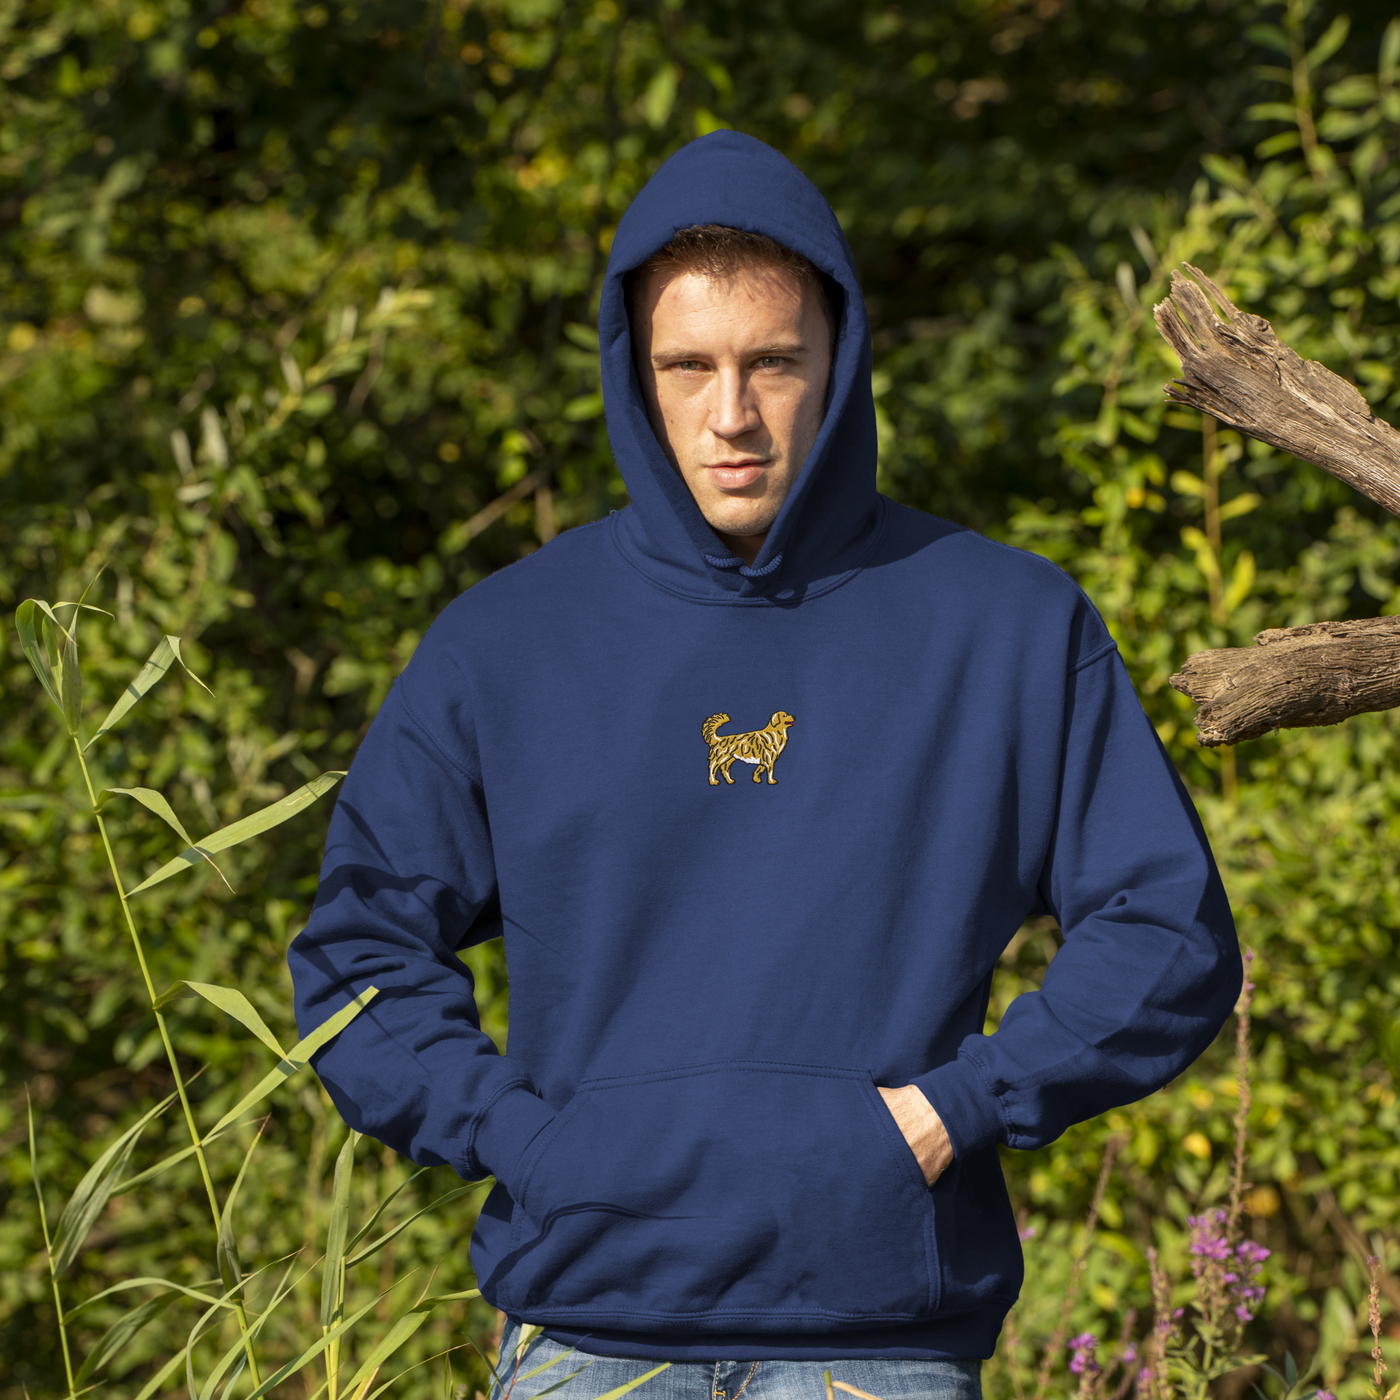 Bobby's Planet Men's Embroidered Golden Retriever Hoodie from Paws Dog Cat Animals Collection in Navy Color#color_navy